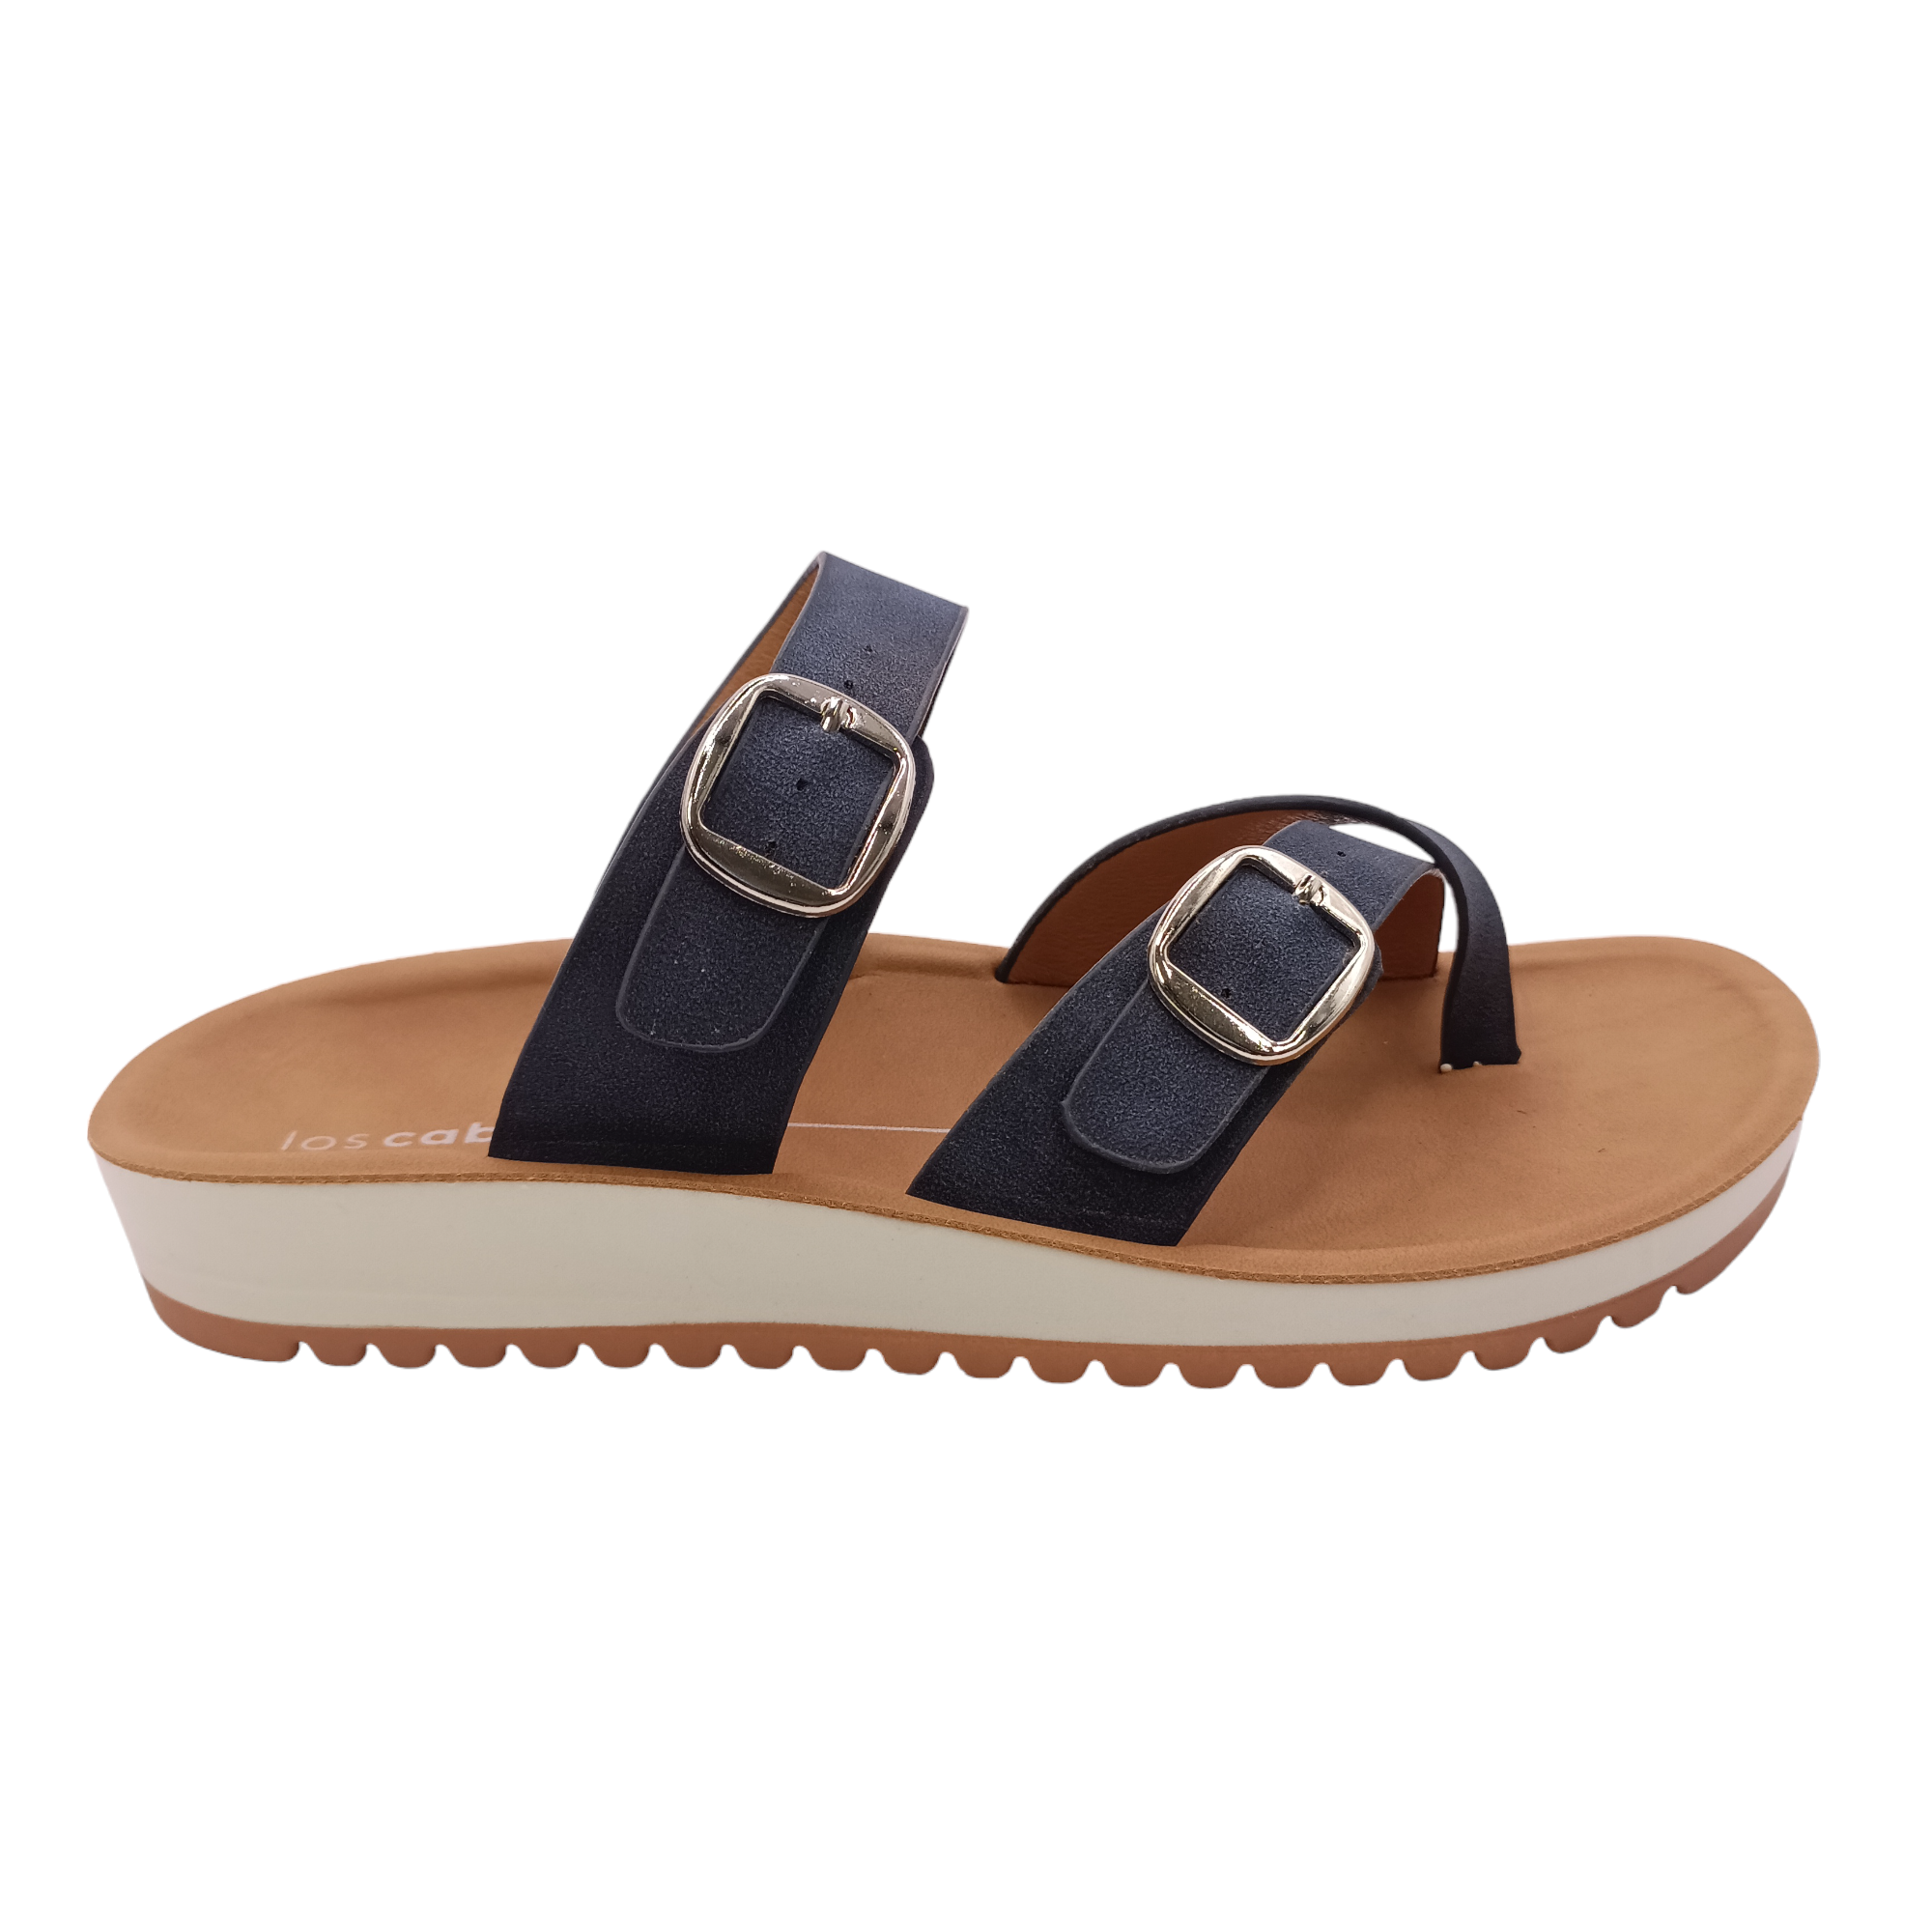 Nins - shoe&amp;me - Los Cabos - Jandal - Jandals, Summer, Womens